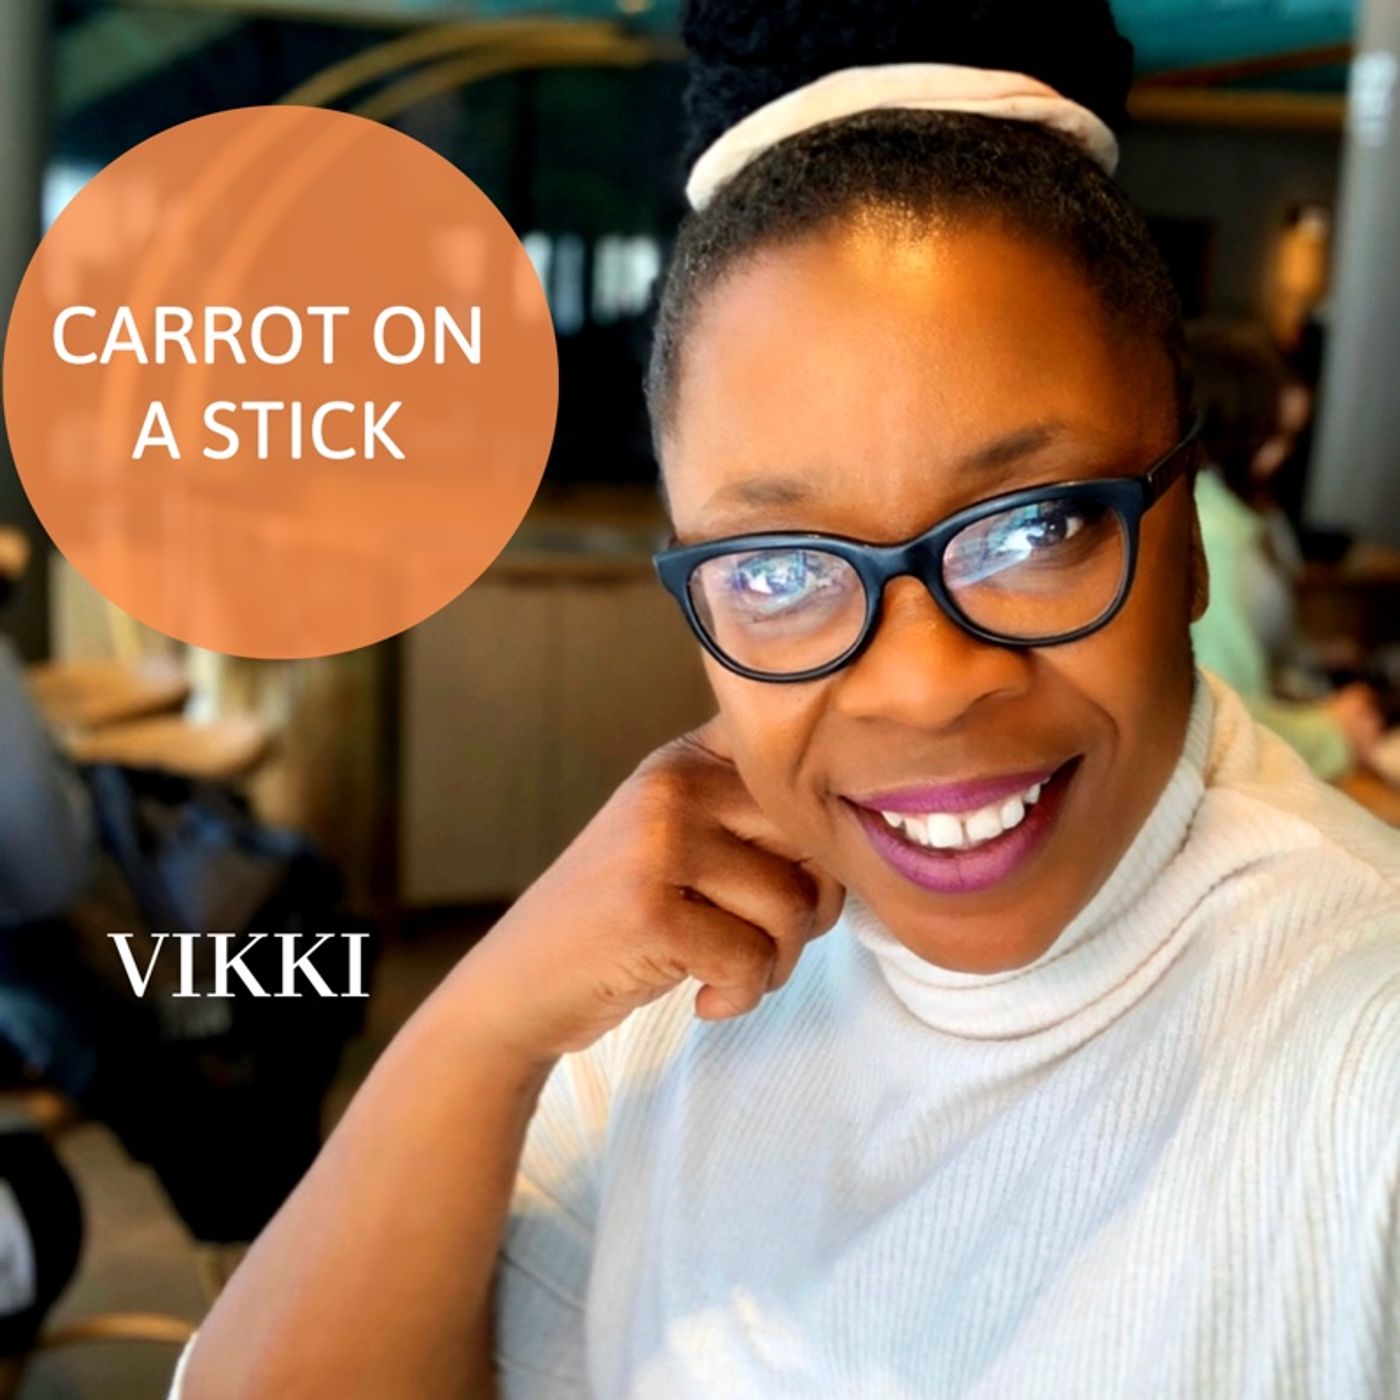 Carrot on a Stick